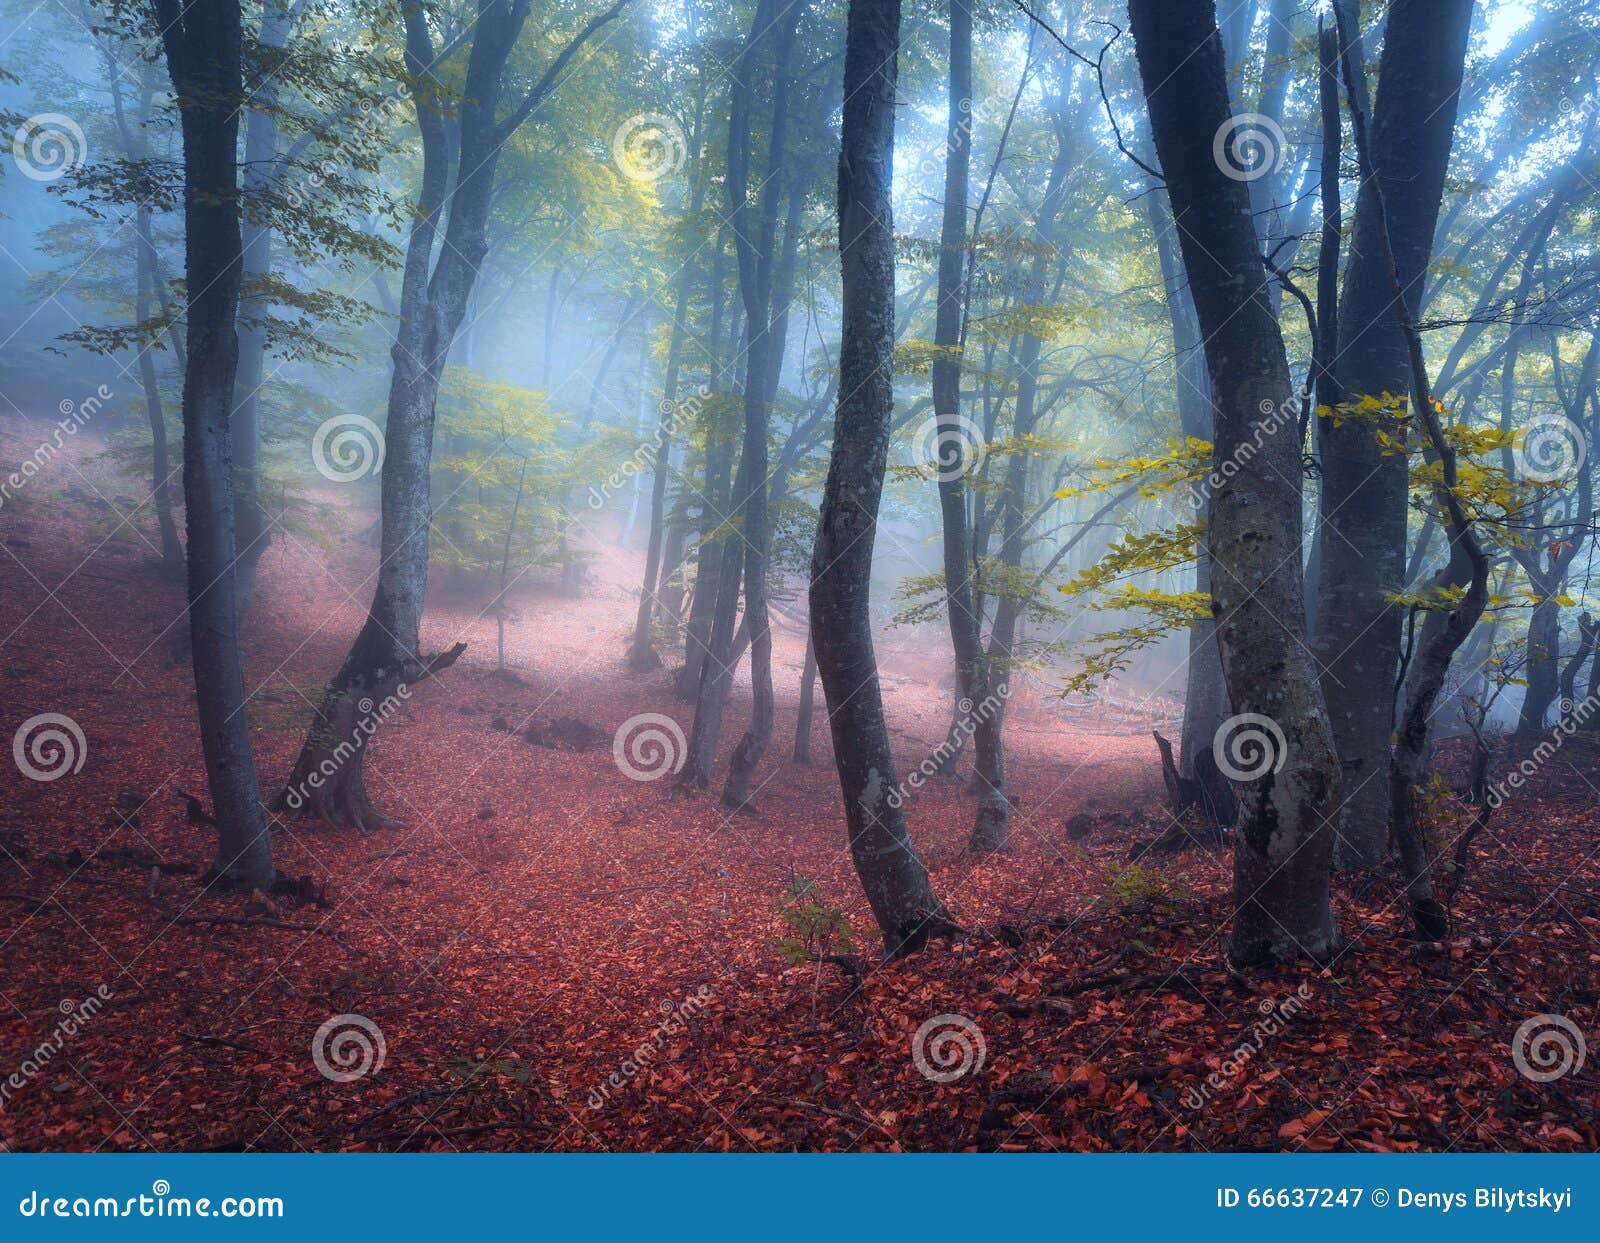 beautiful magic forest in fog in autumn. mysterious wood. fairytale